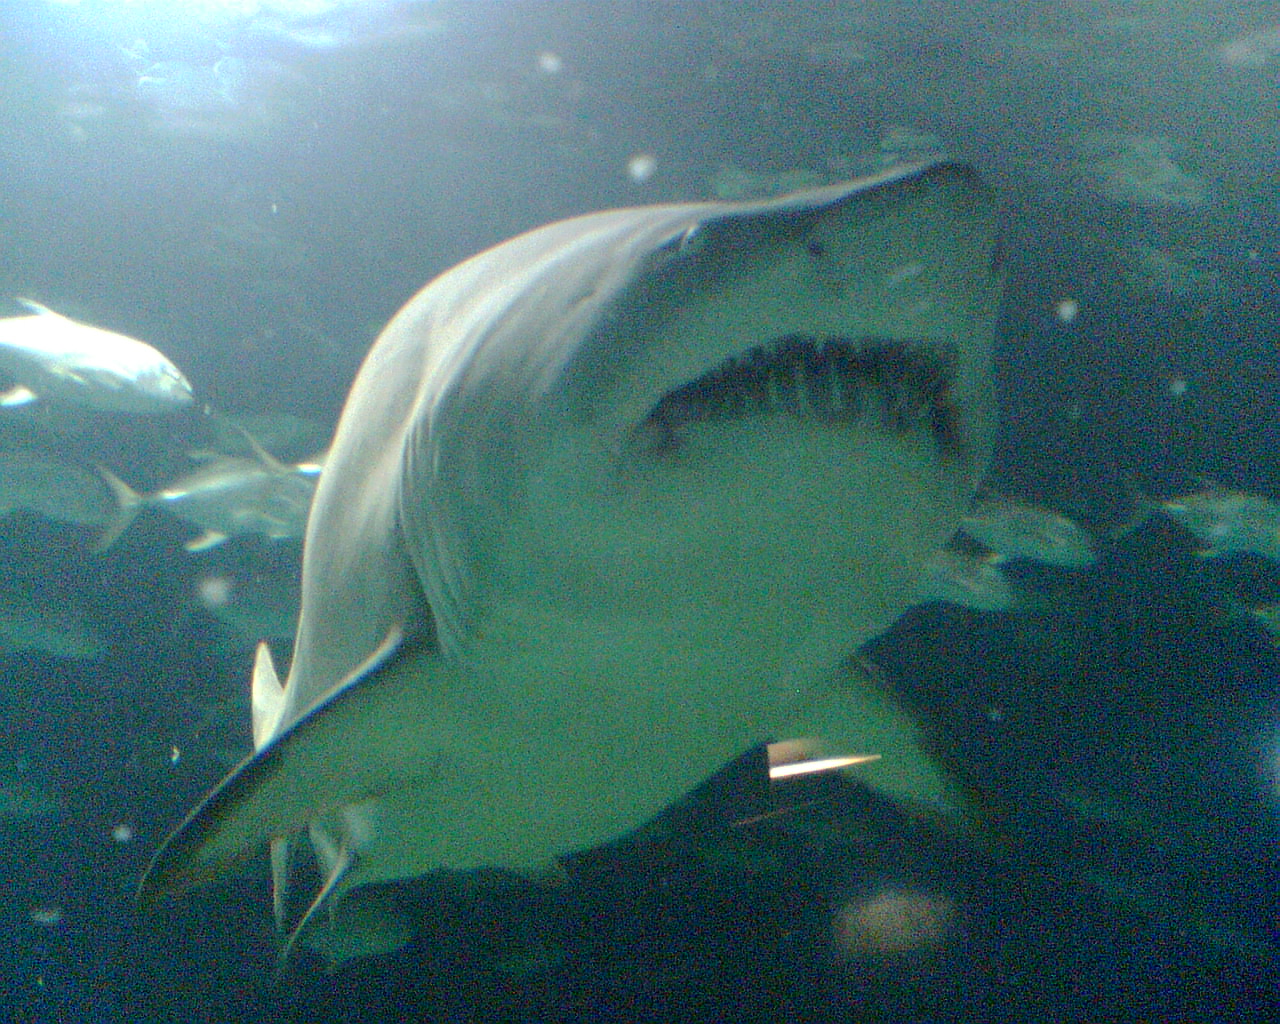 a very large shark swimming under some water